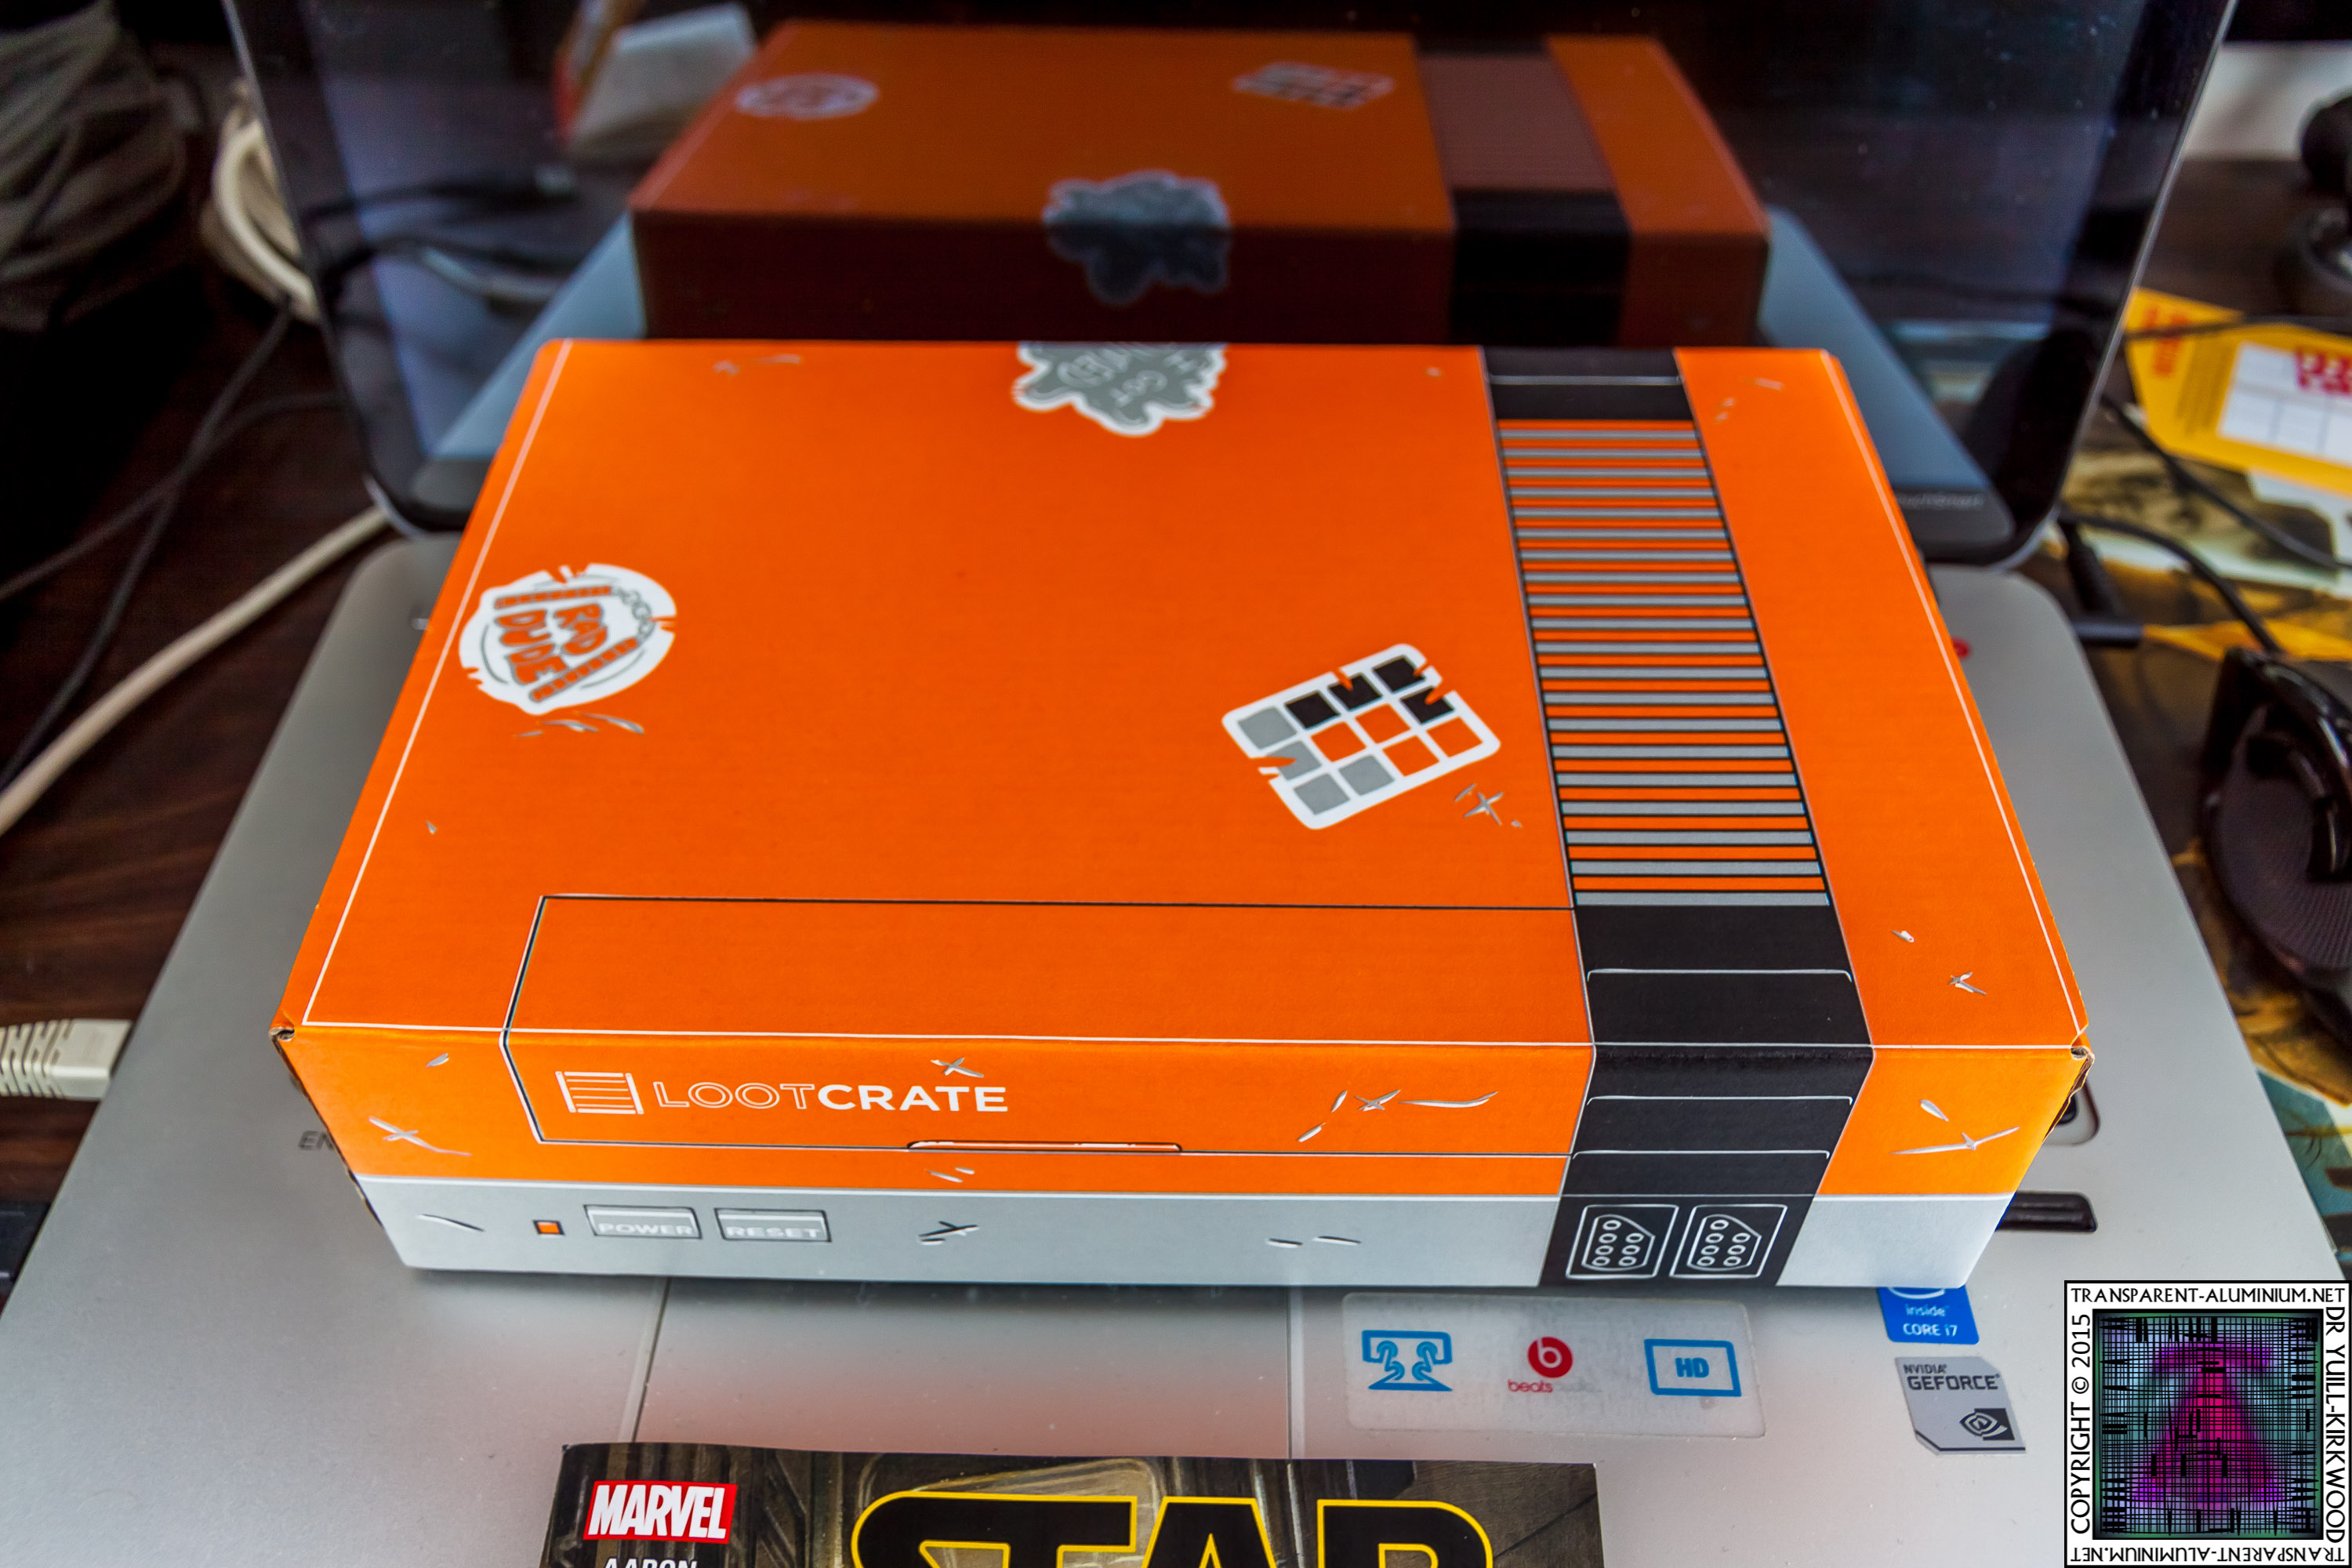 Baby Development Loot Crate: The Perfect Box for Your Growing Baby